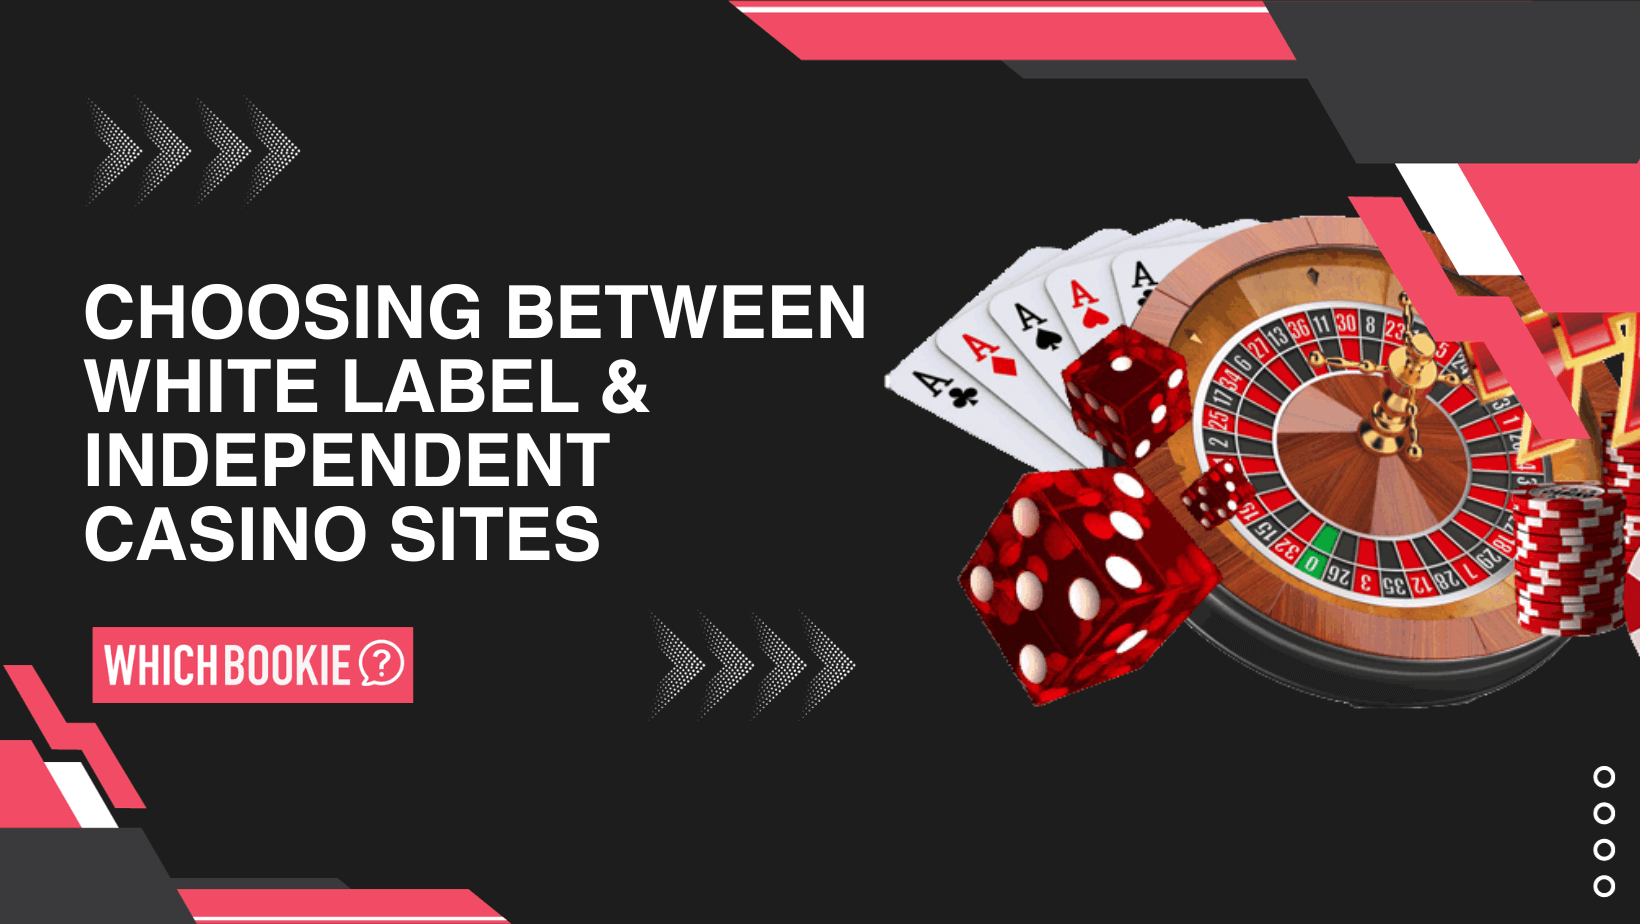 Choosing Between White Label & Independent Casino Sites